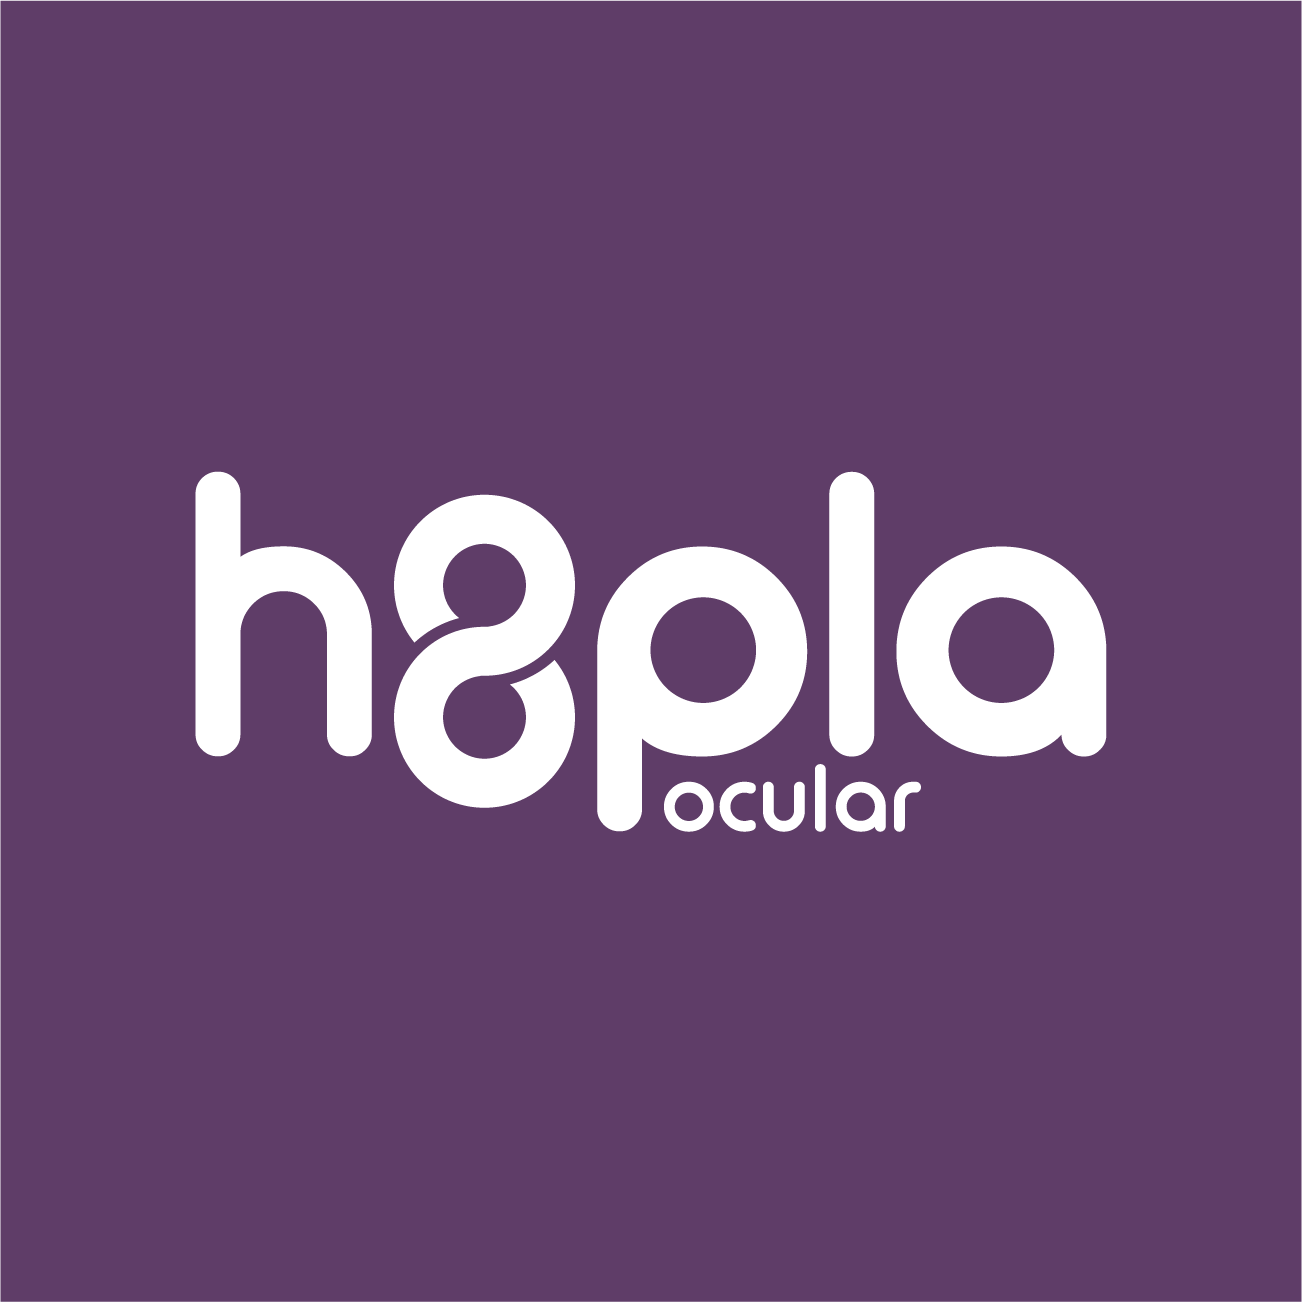 We are a Graphic Design, Film, Photography, Advertising, Digital Media & Marketing Agency based in Jamaica; Helping clients build their brands. #behoopla